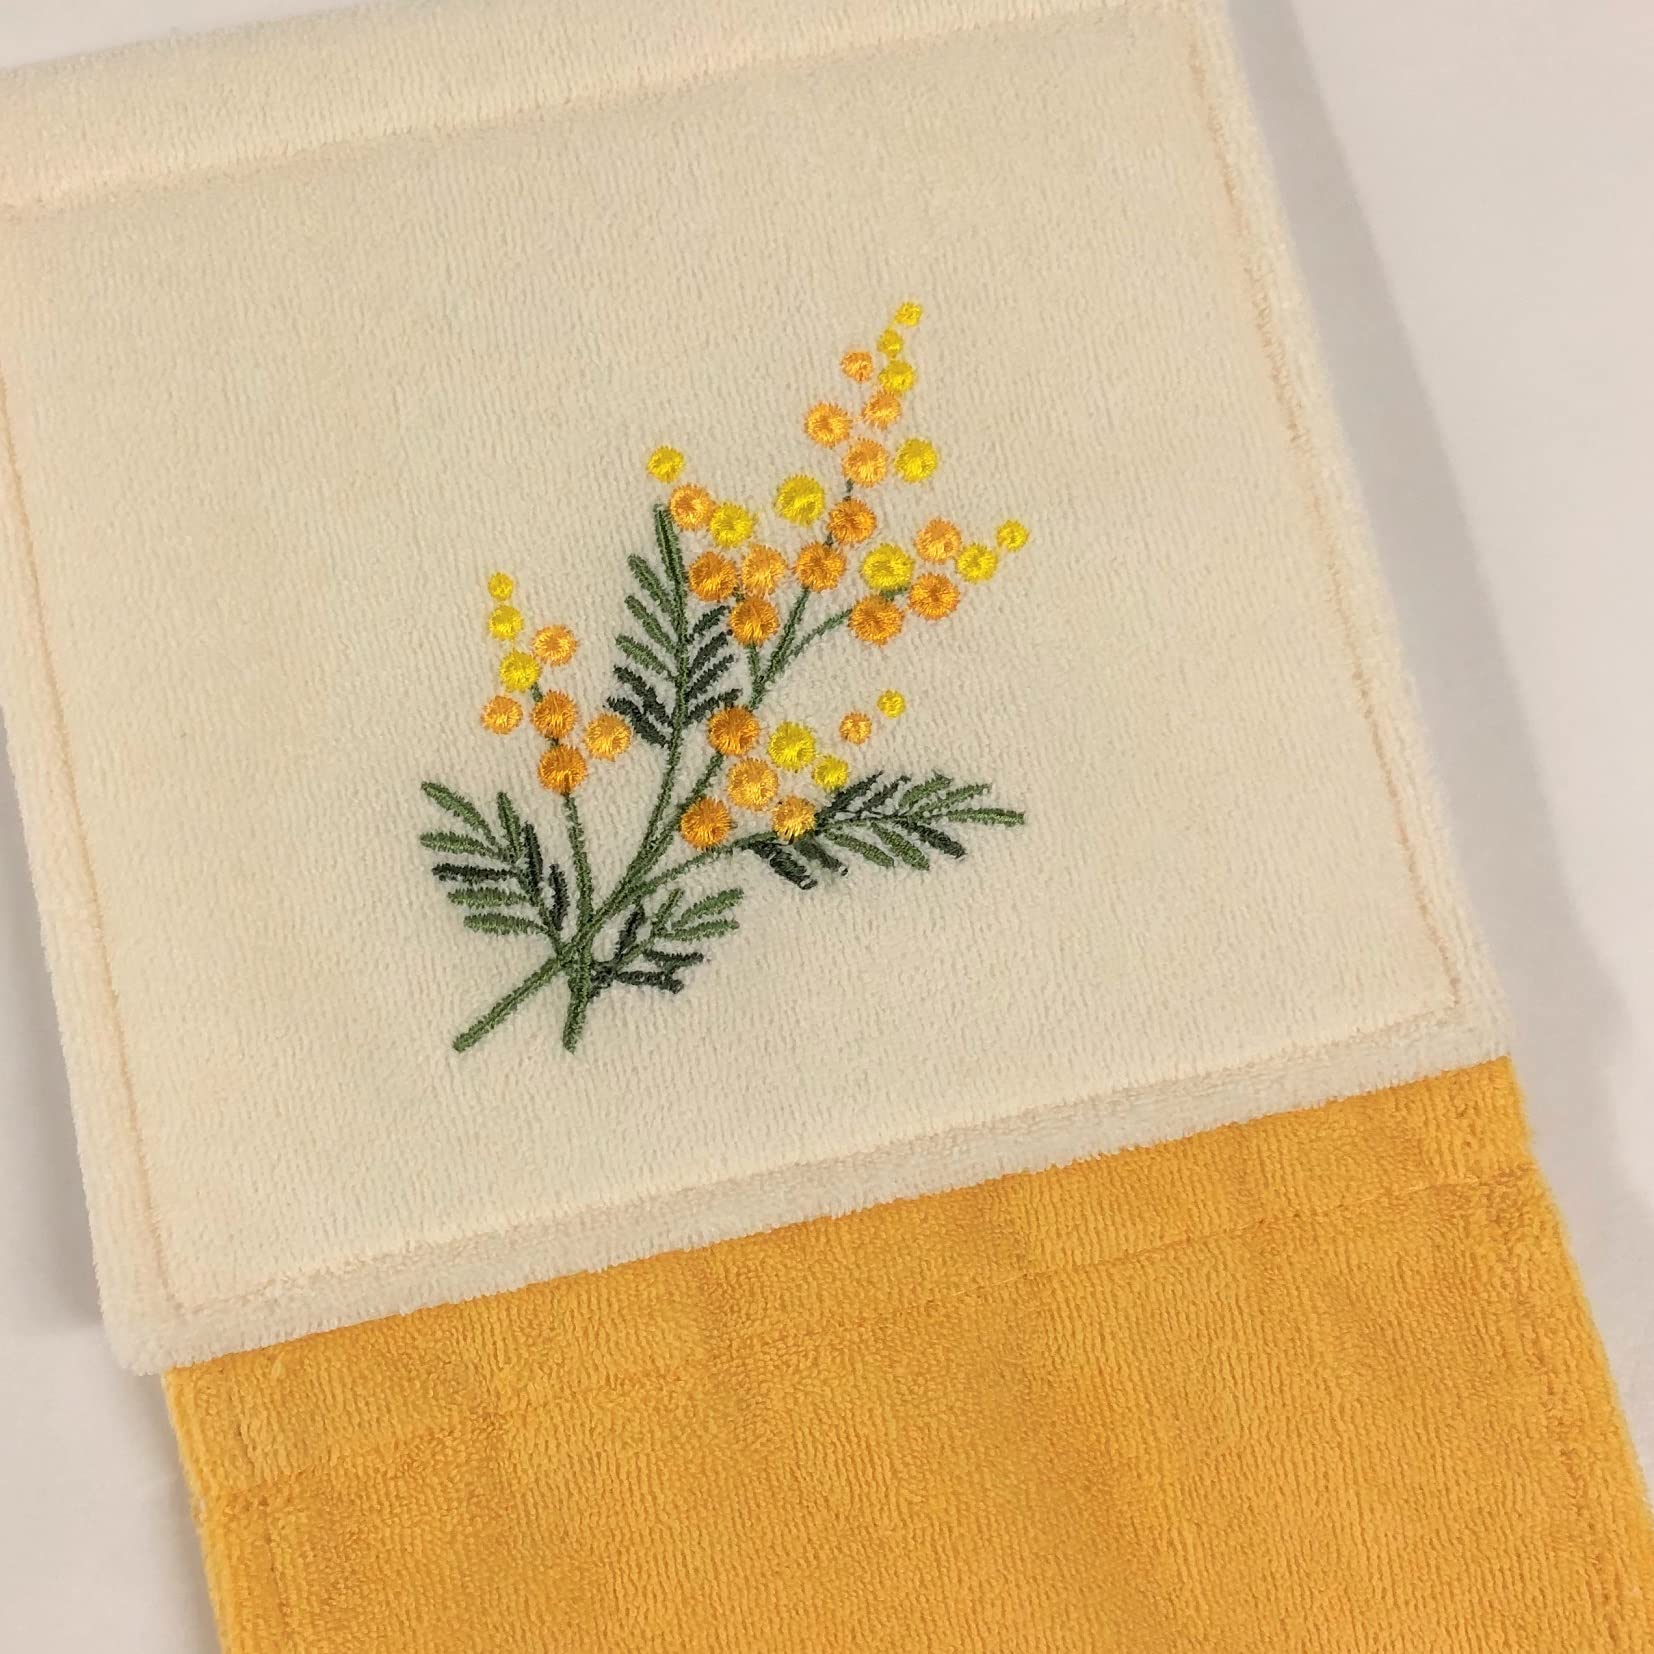 Senko Japan Sds Mimosa Paper Holder Cover Yellow Flower Embroidery 63787